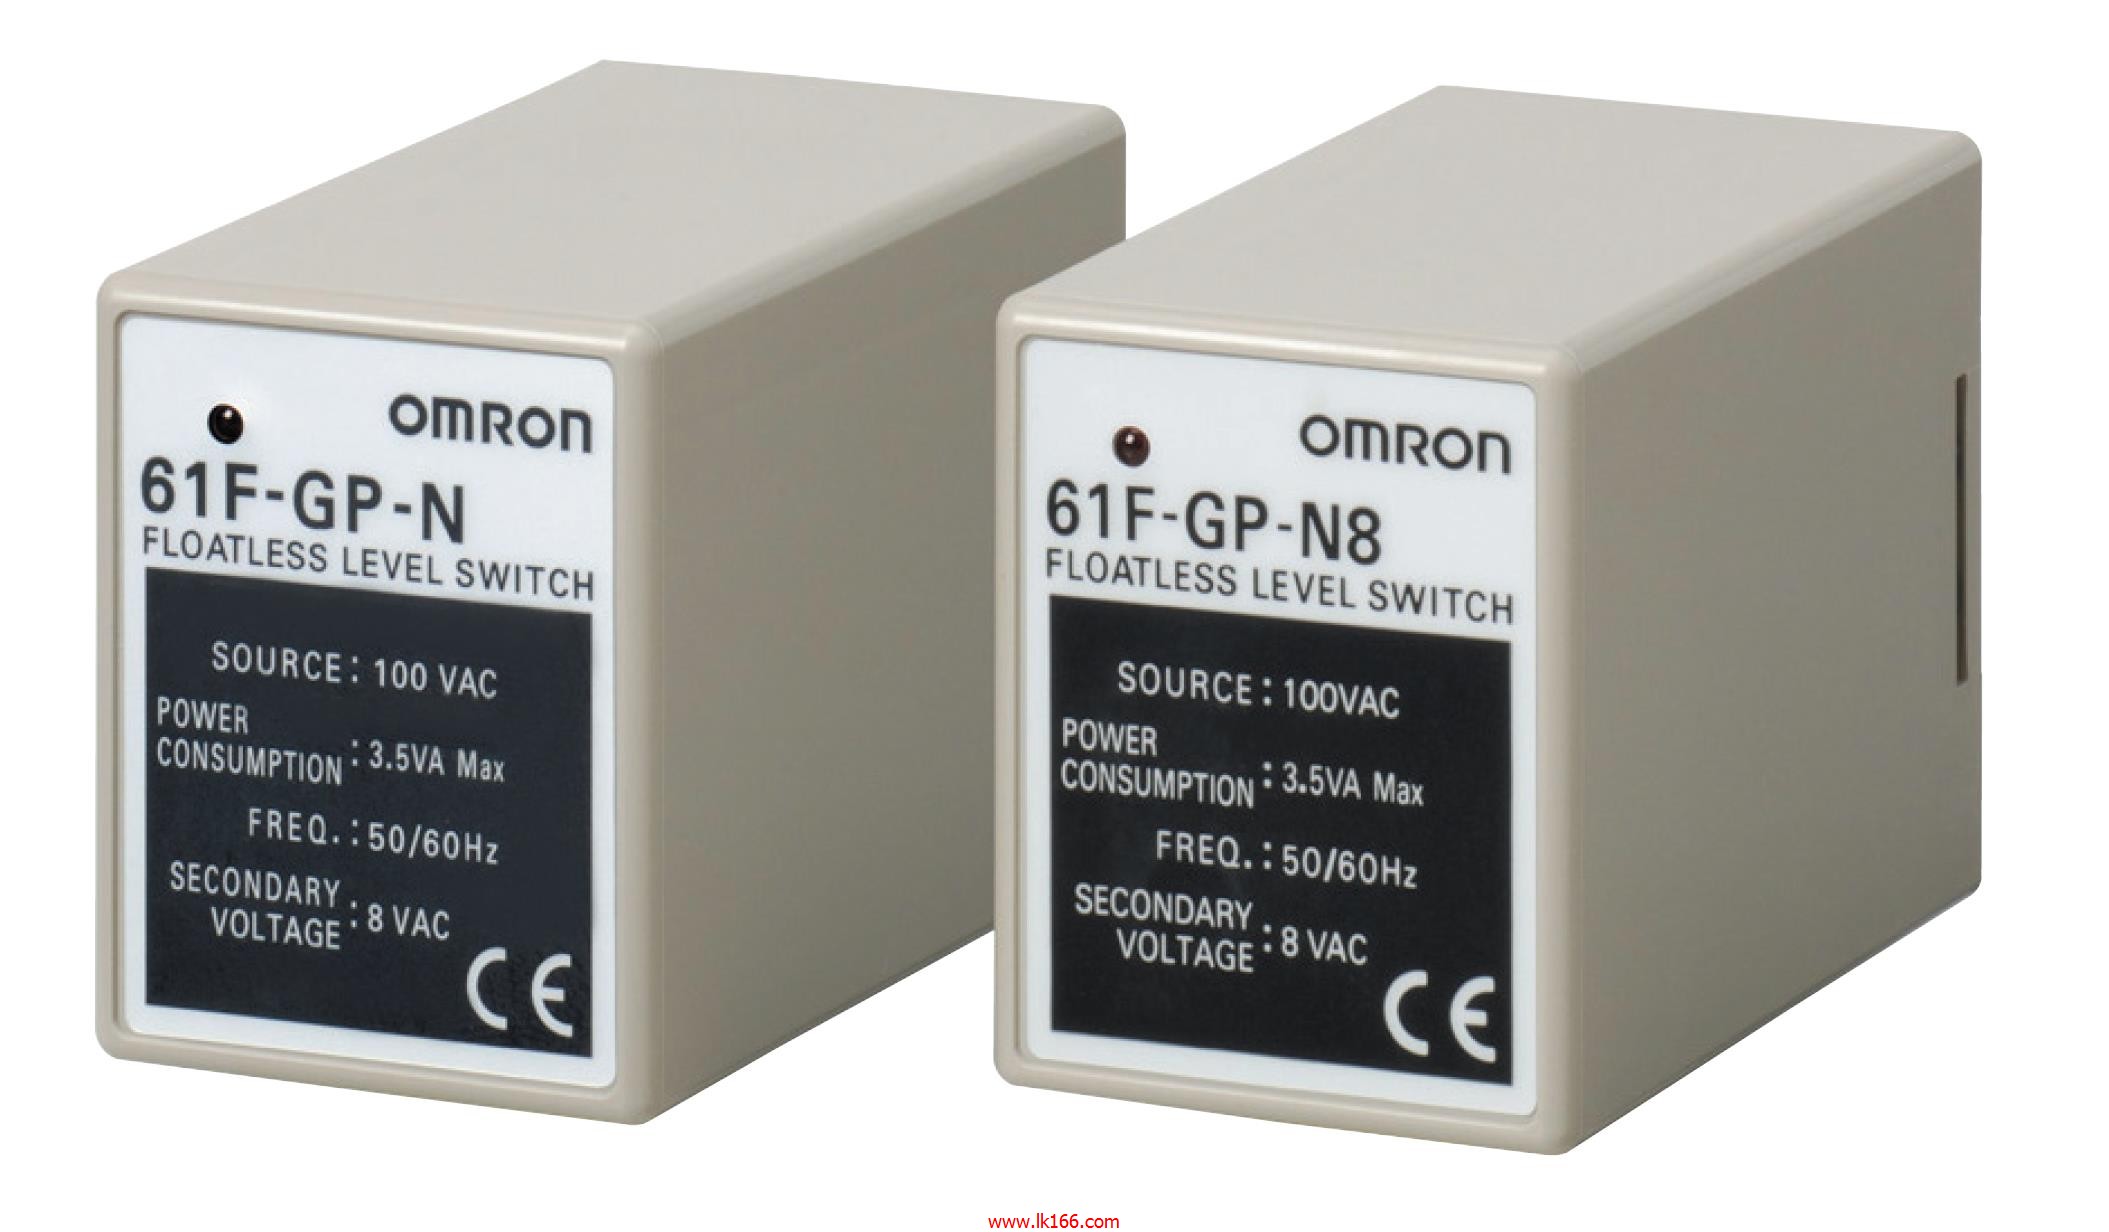 OMRON Floatless Level Switch (Compact, Plug-in Type) 61F-GP-N8L 2KM